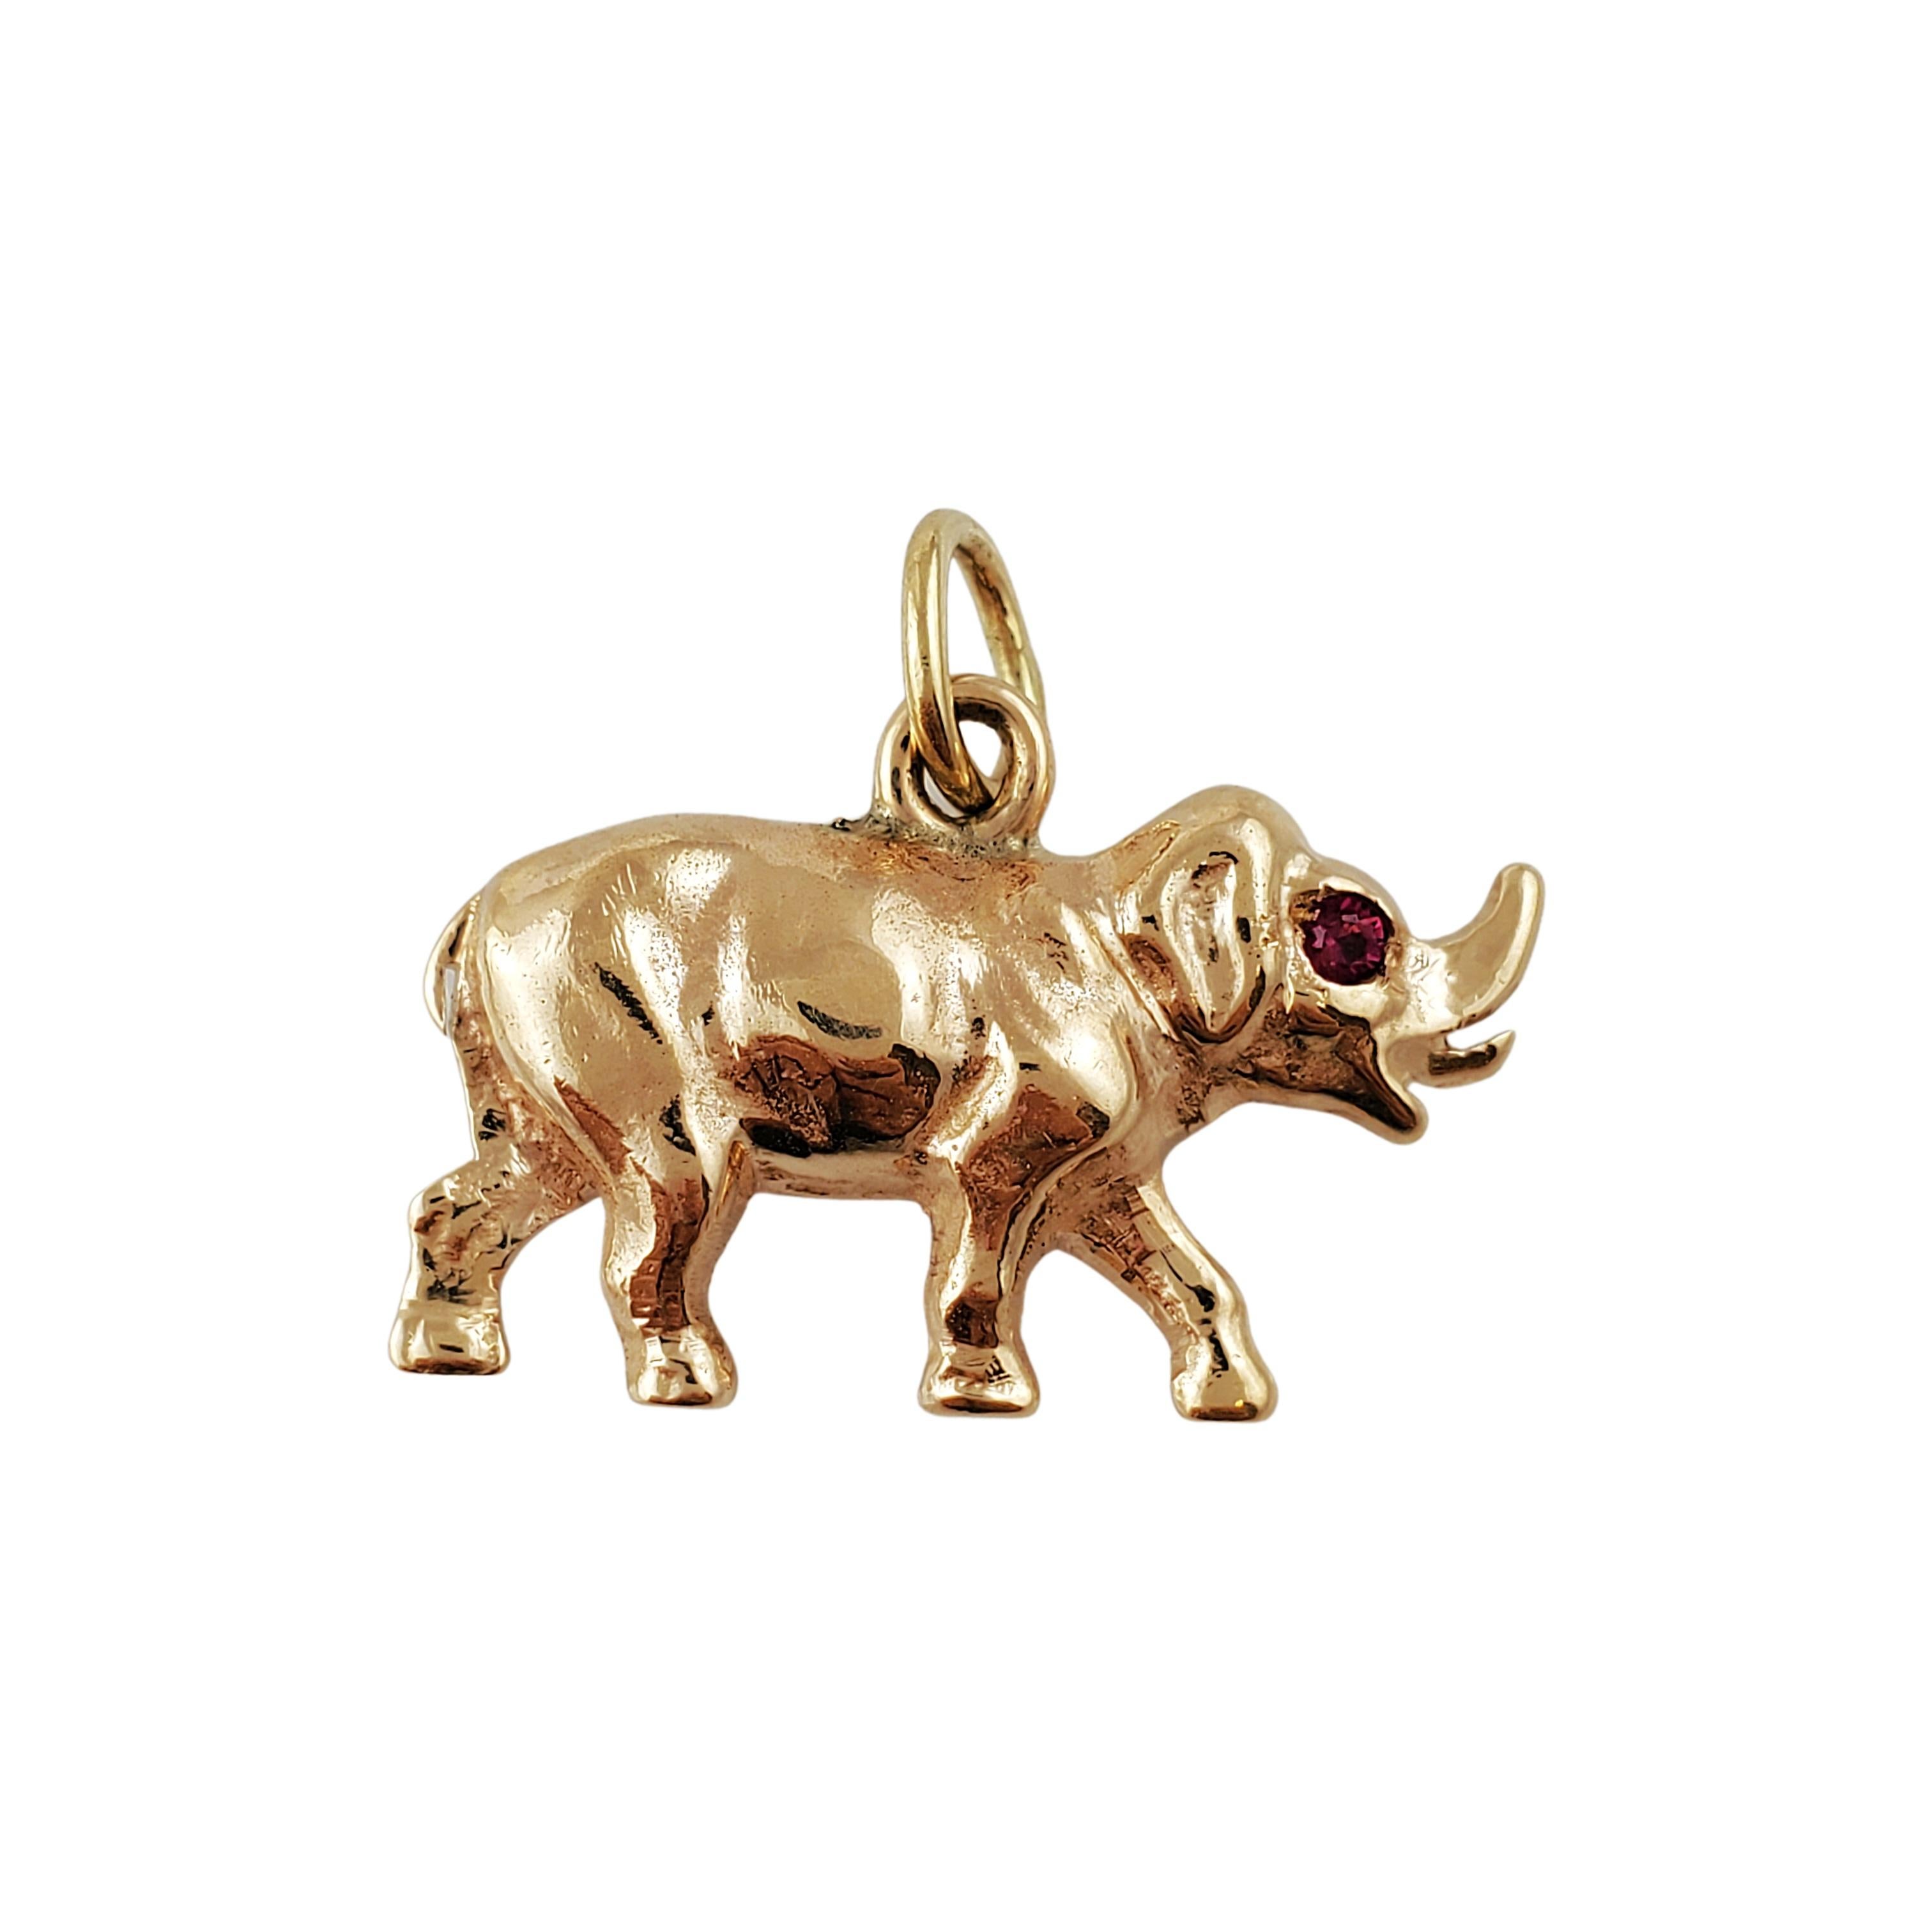 14K Yellow Gold Elephant Pendent

Beautiful 3D elephant pendent is crafted in 14k yellow gold and features simulated red ruby stones as eyes.

Size: 21mm X 14mm

Weight: 5.9 gr ./ 3.7 dwt

Hallmark: 14K

Very good condition, professionally